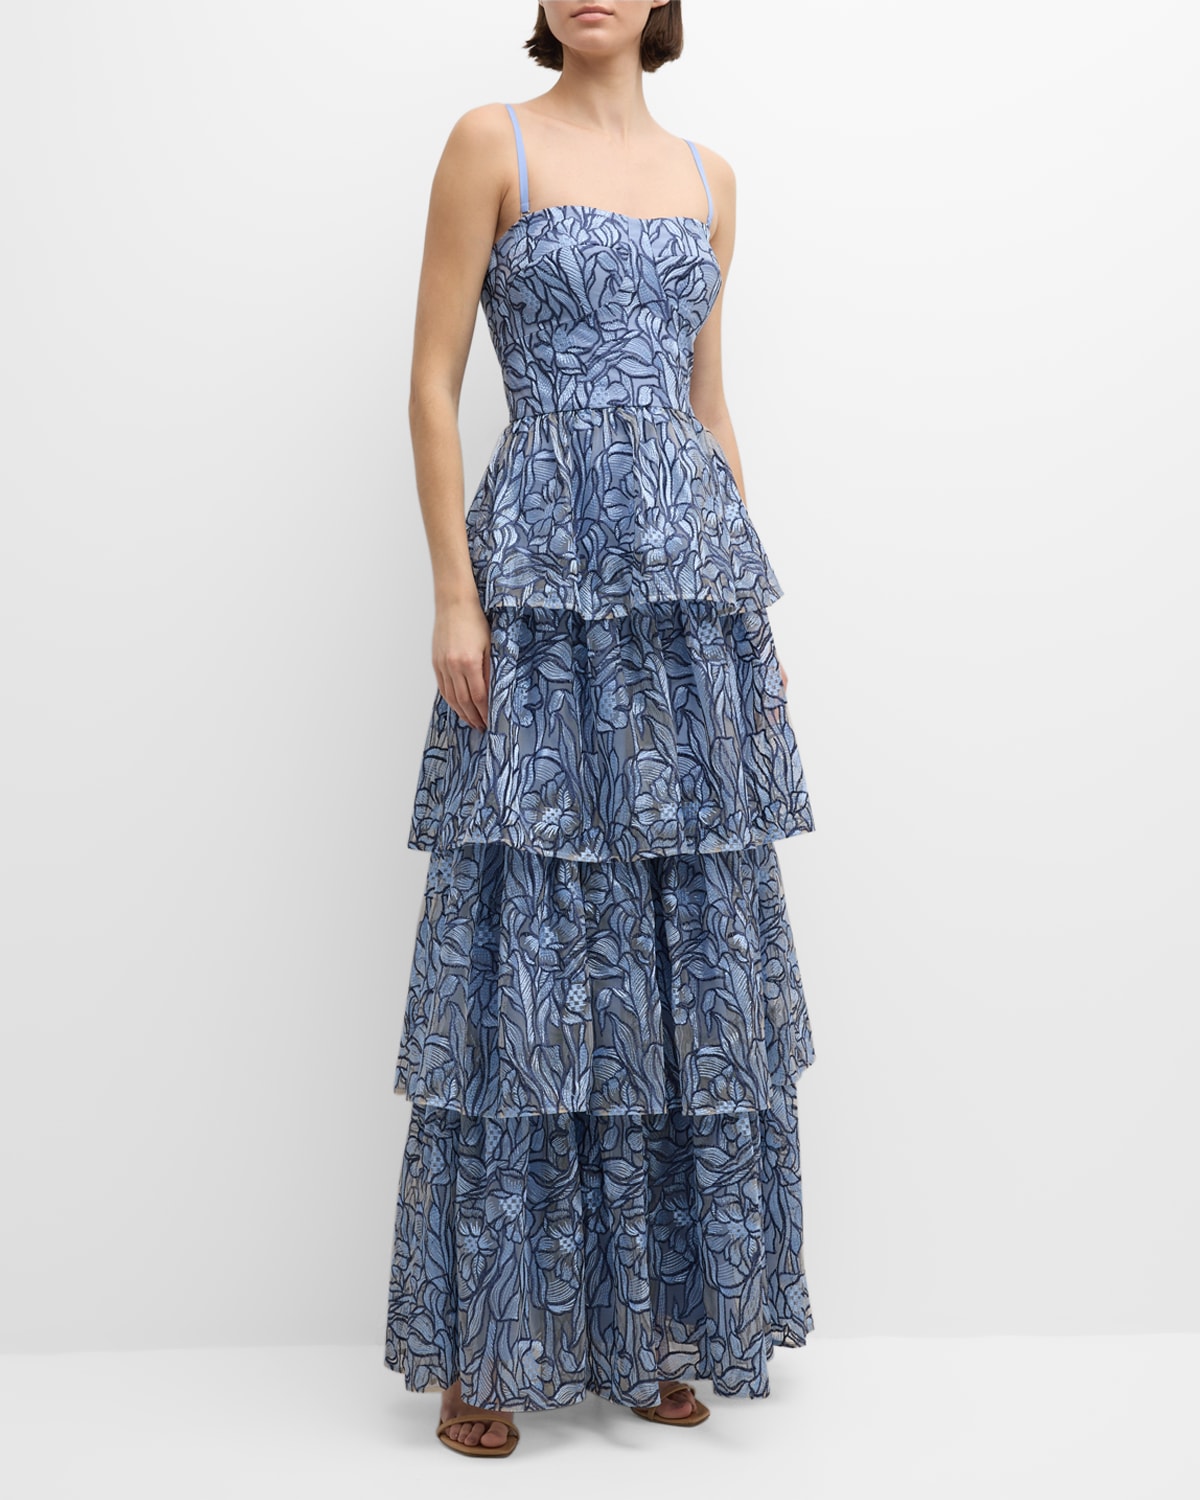 Aubriella Ruffle Tiered Floral-Embroidered Gown